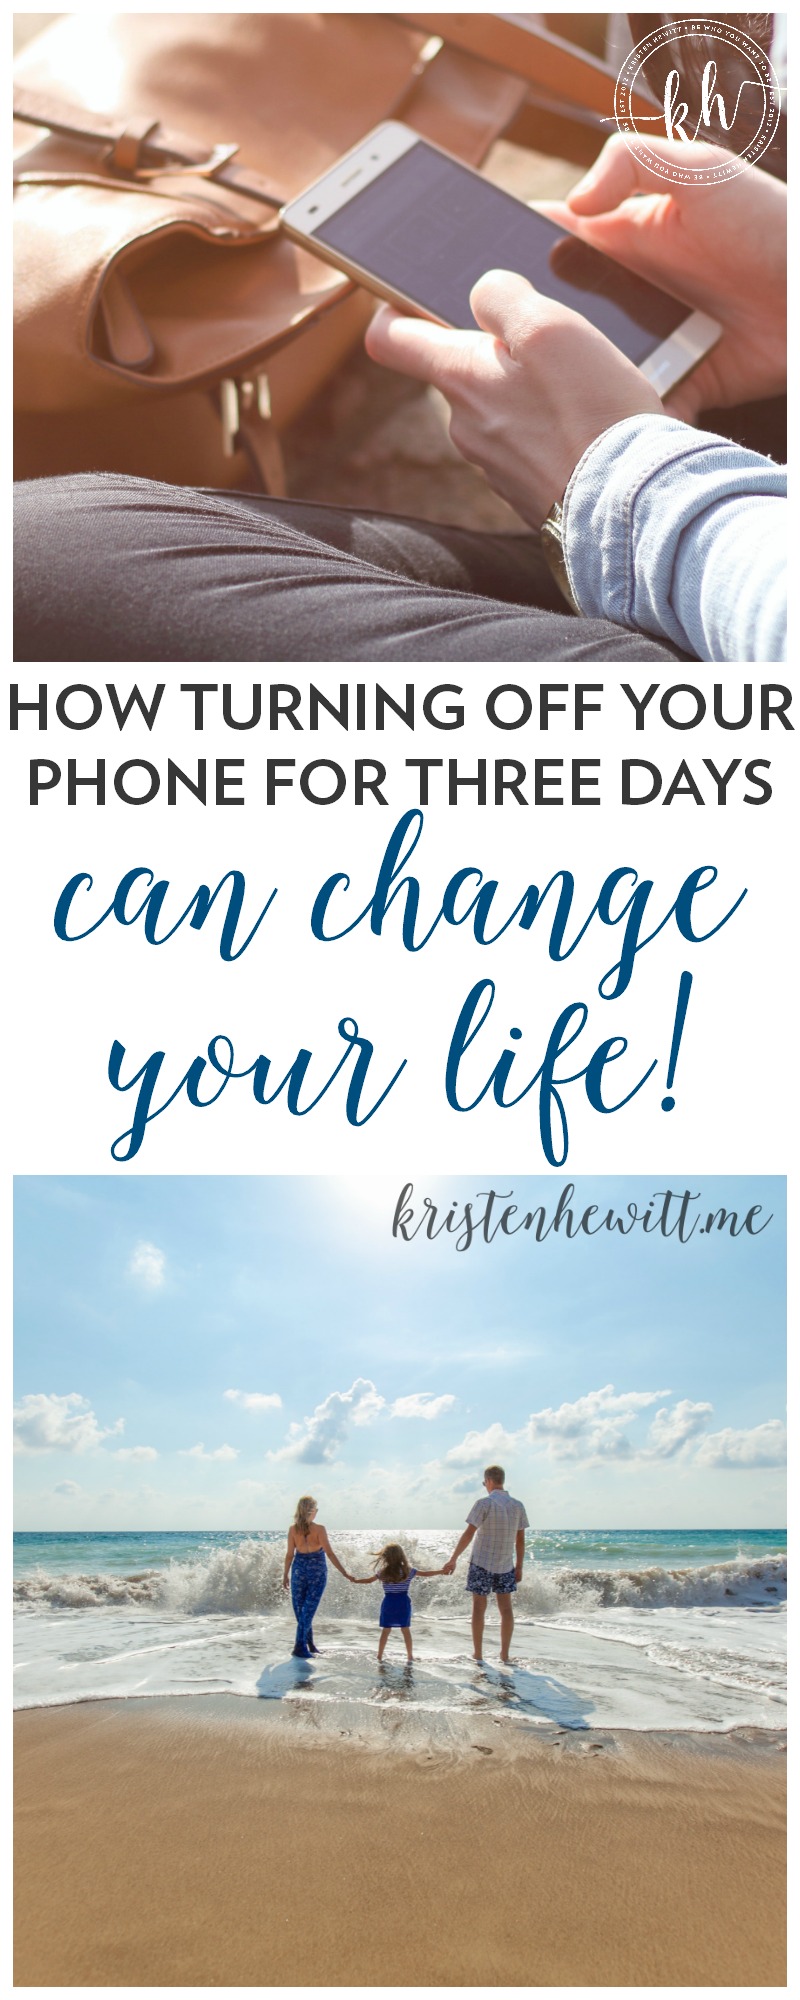 Have you ever REALLY taken a social media timeout? Turned off your phone and disconnected? Here's how turning off your phone for three days can change your life!